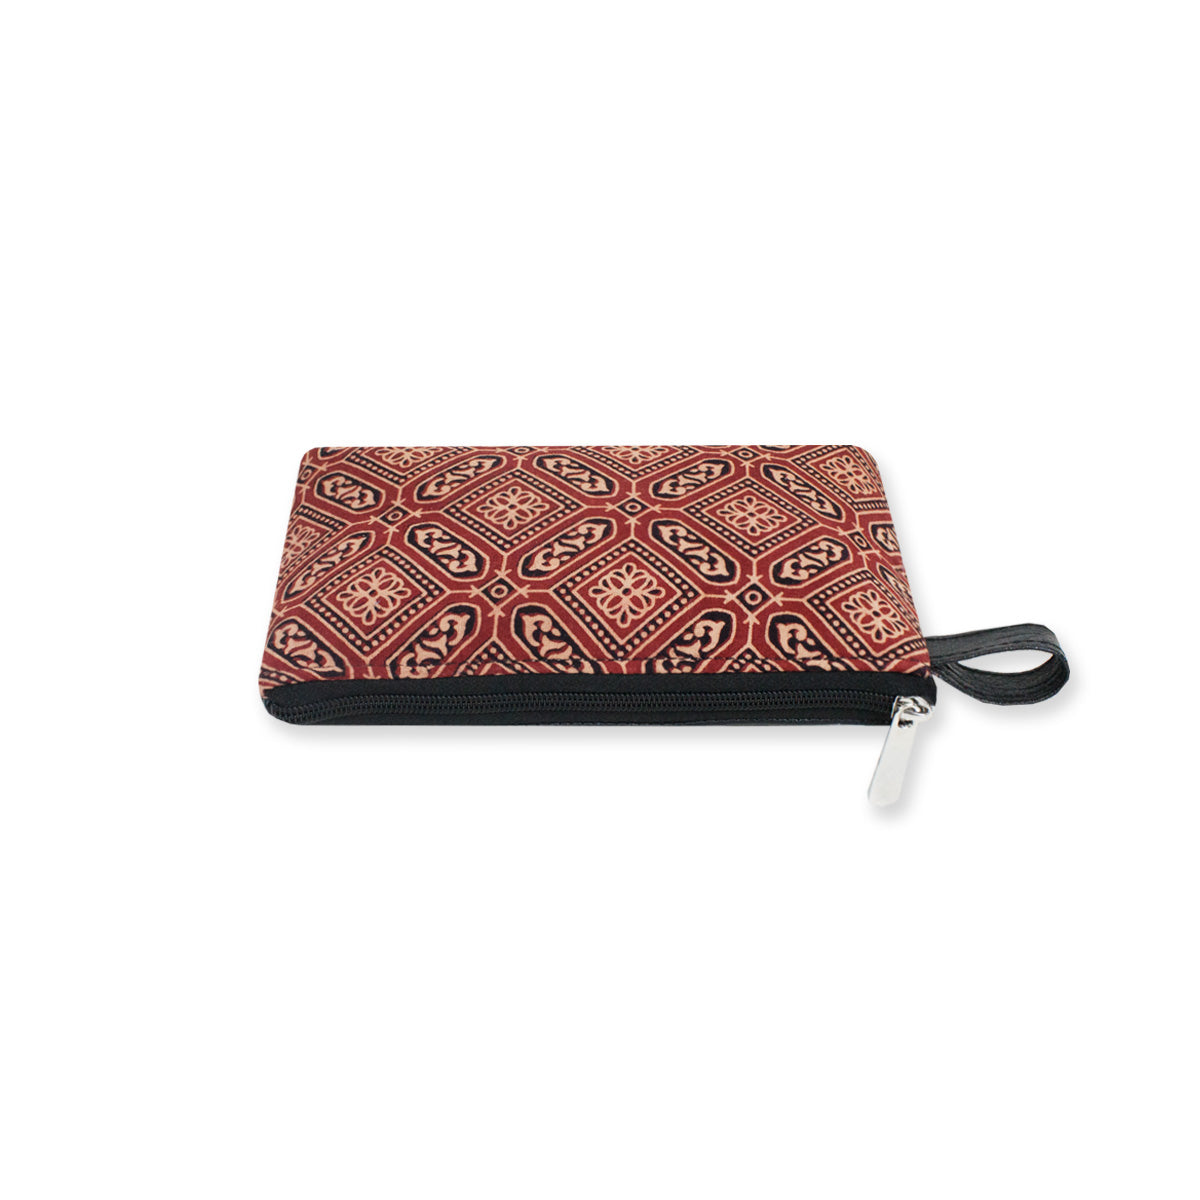 Athangudi Tiles Block Printed Pouch